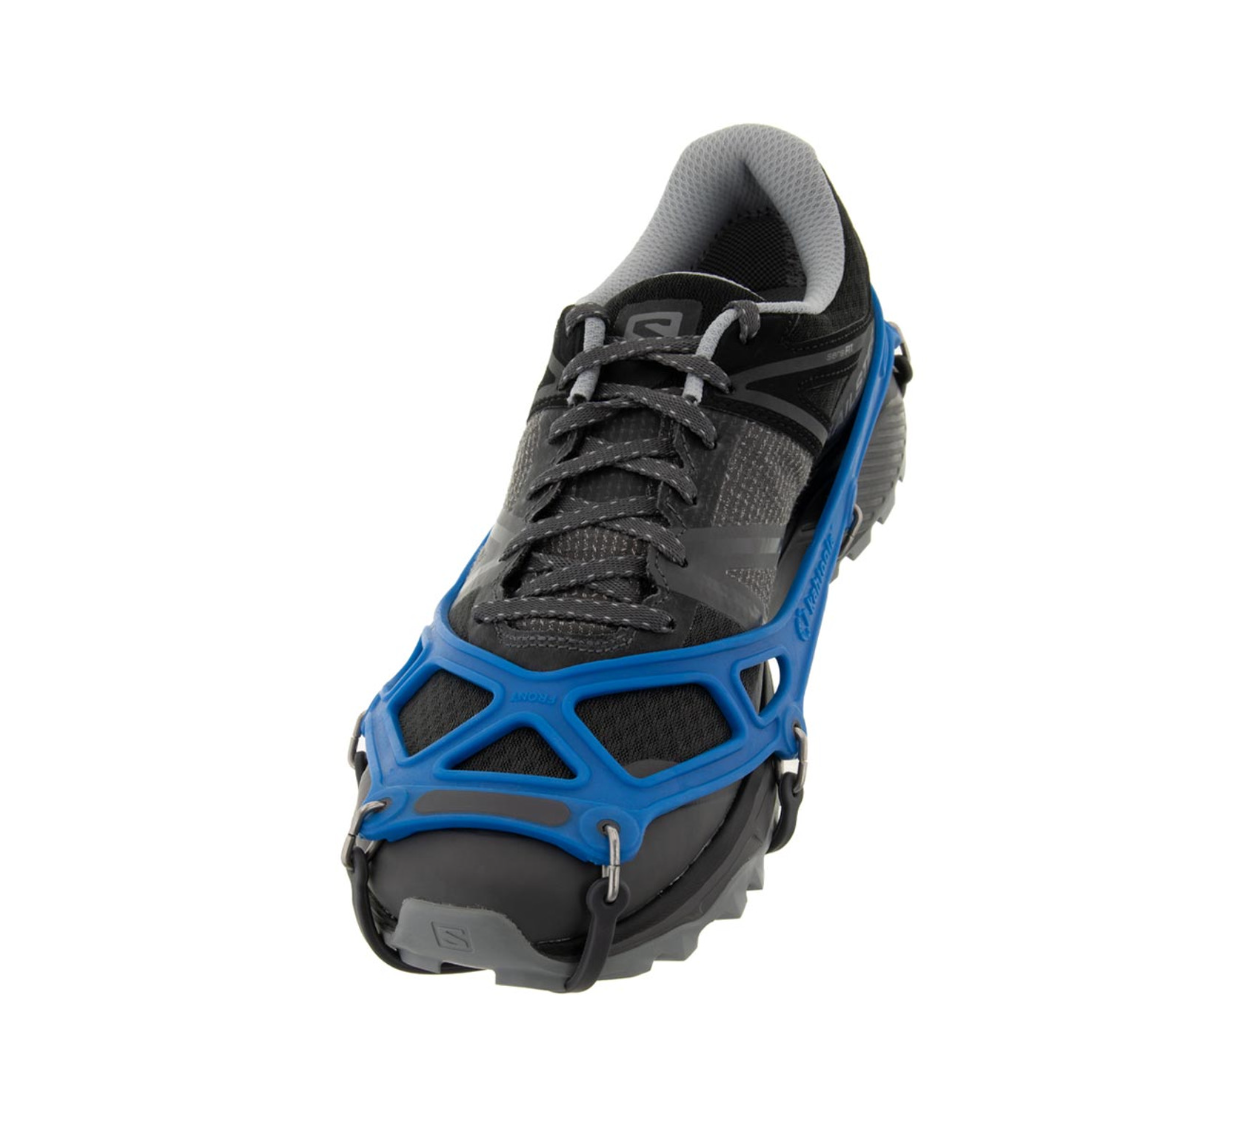 EXOspikes Footwear Traction